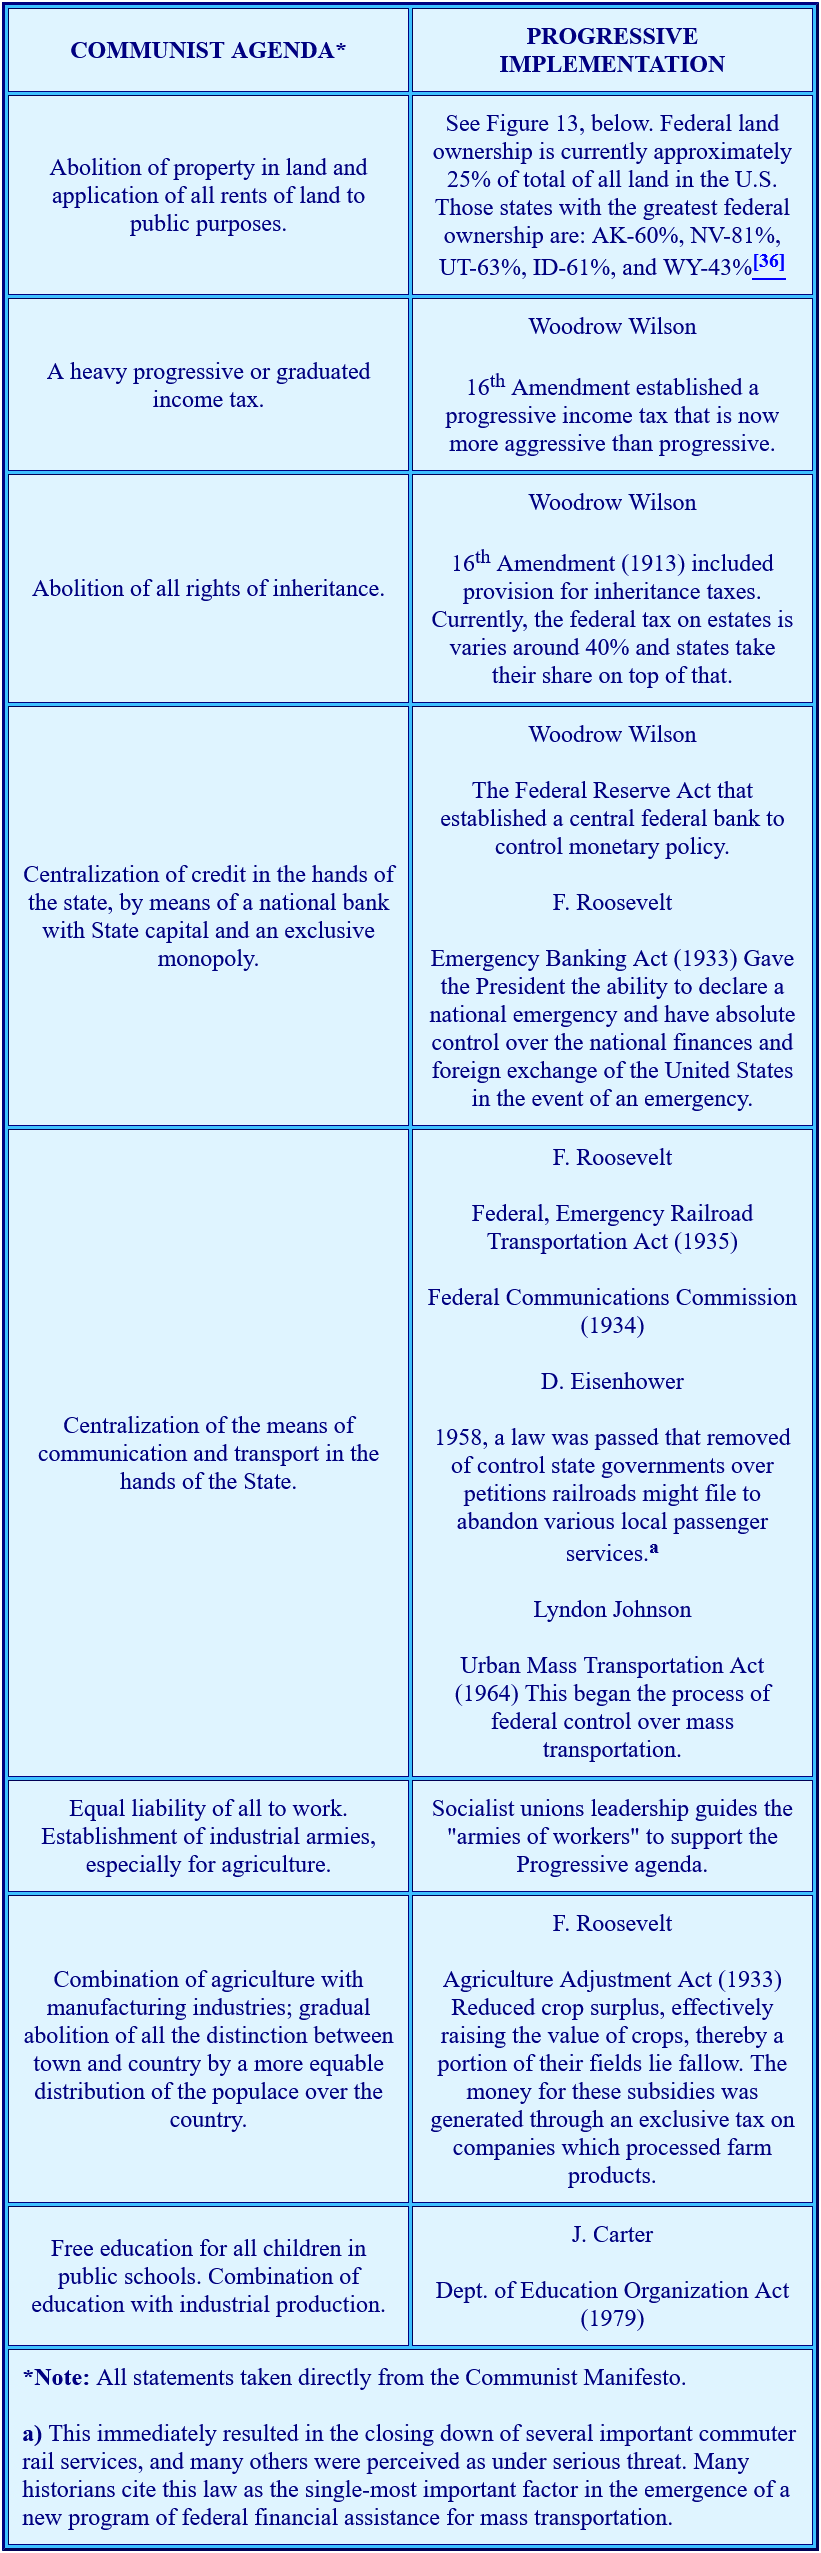 A comparison between the implementation agenda given in the Communist Manifesto and the actions of Progressives over the past century